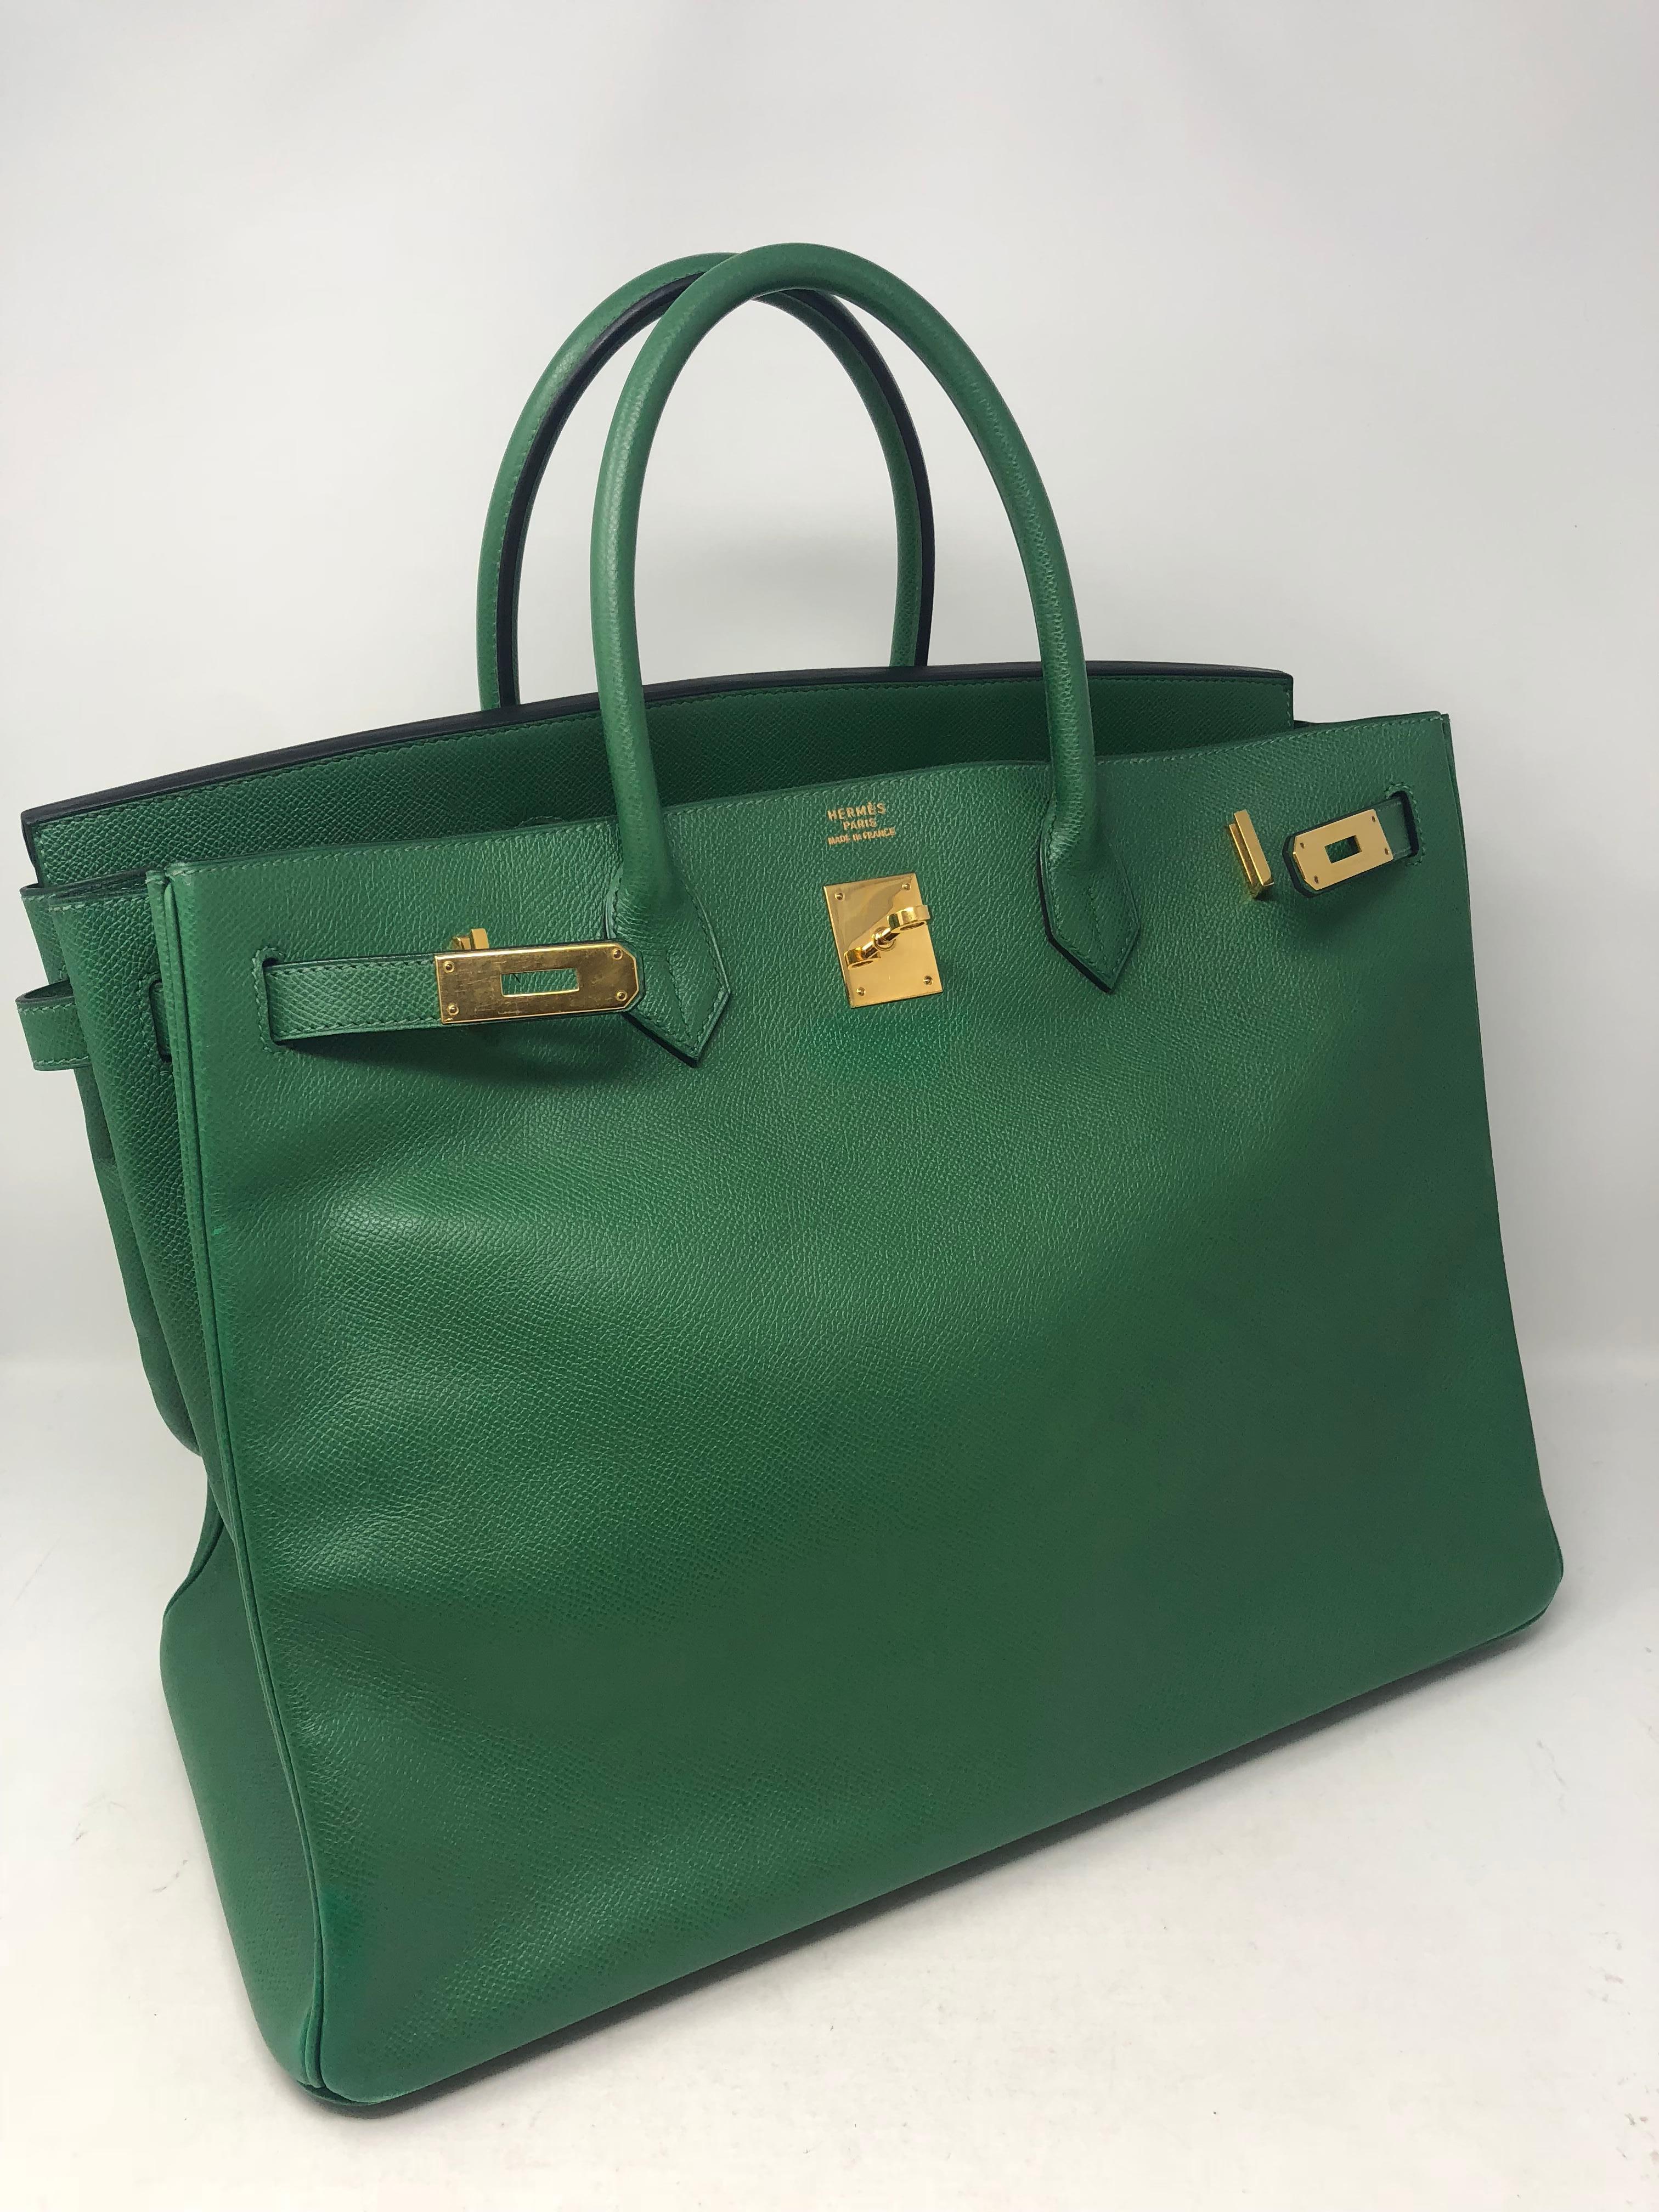 Hermes Birkin 40 Green with gold hardware. Epsom leather. Beautiful emerald green color. Rare size 40. Good condition. Guaranteed authentic. 